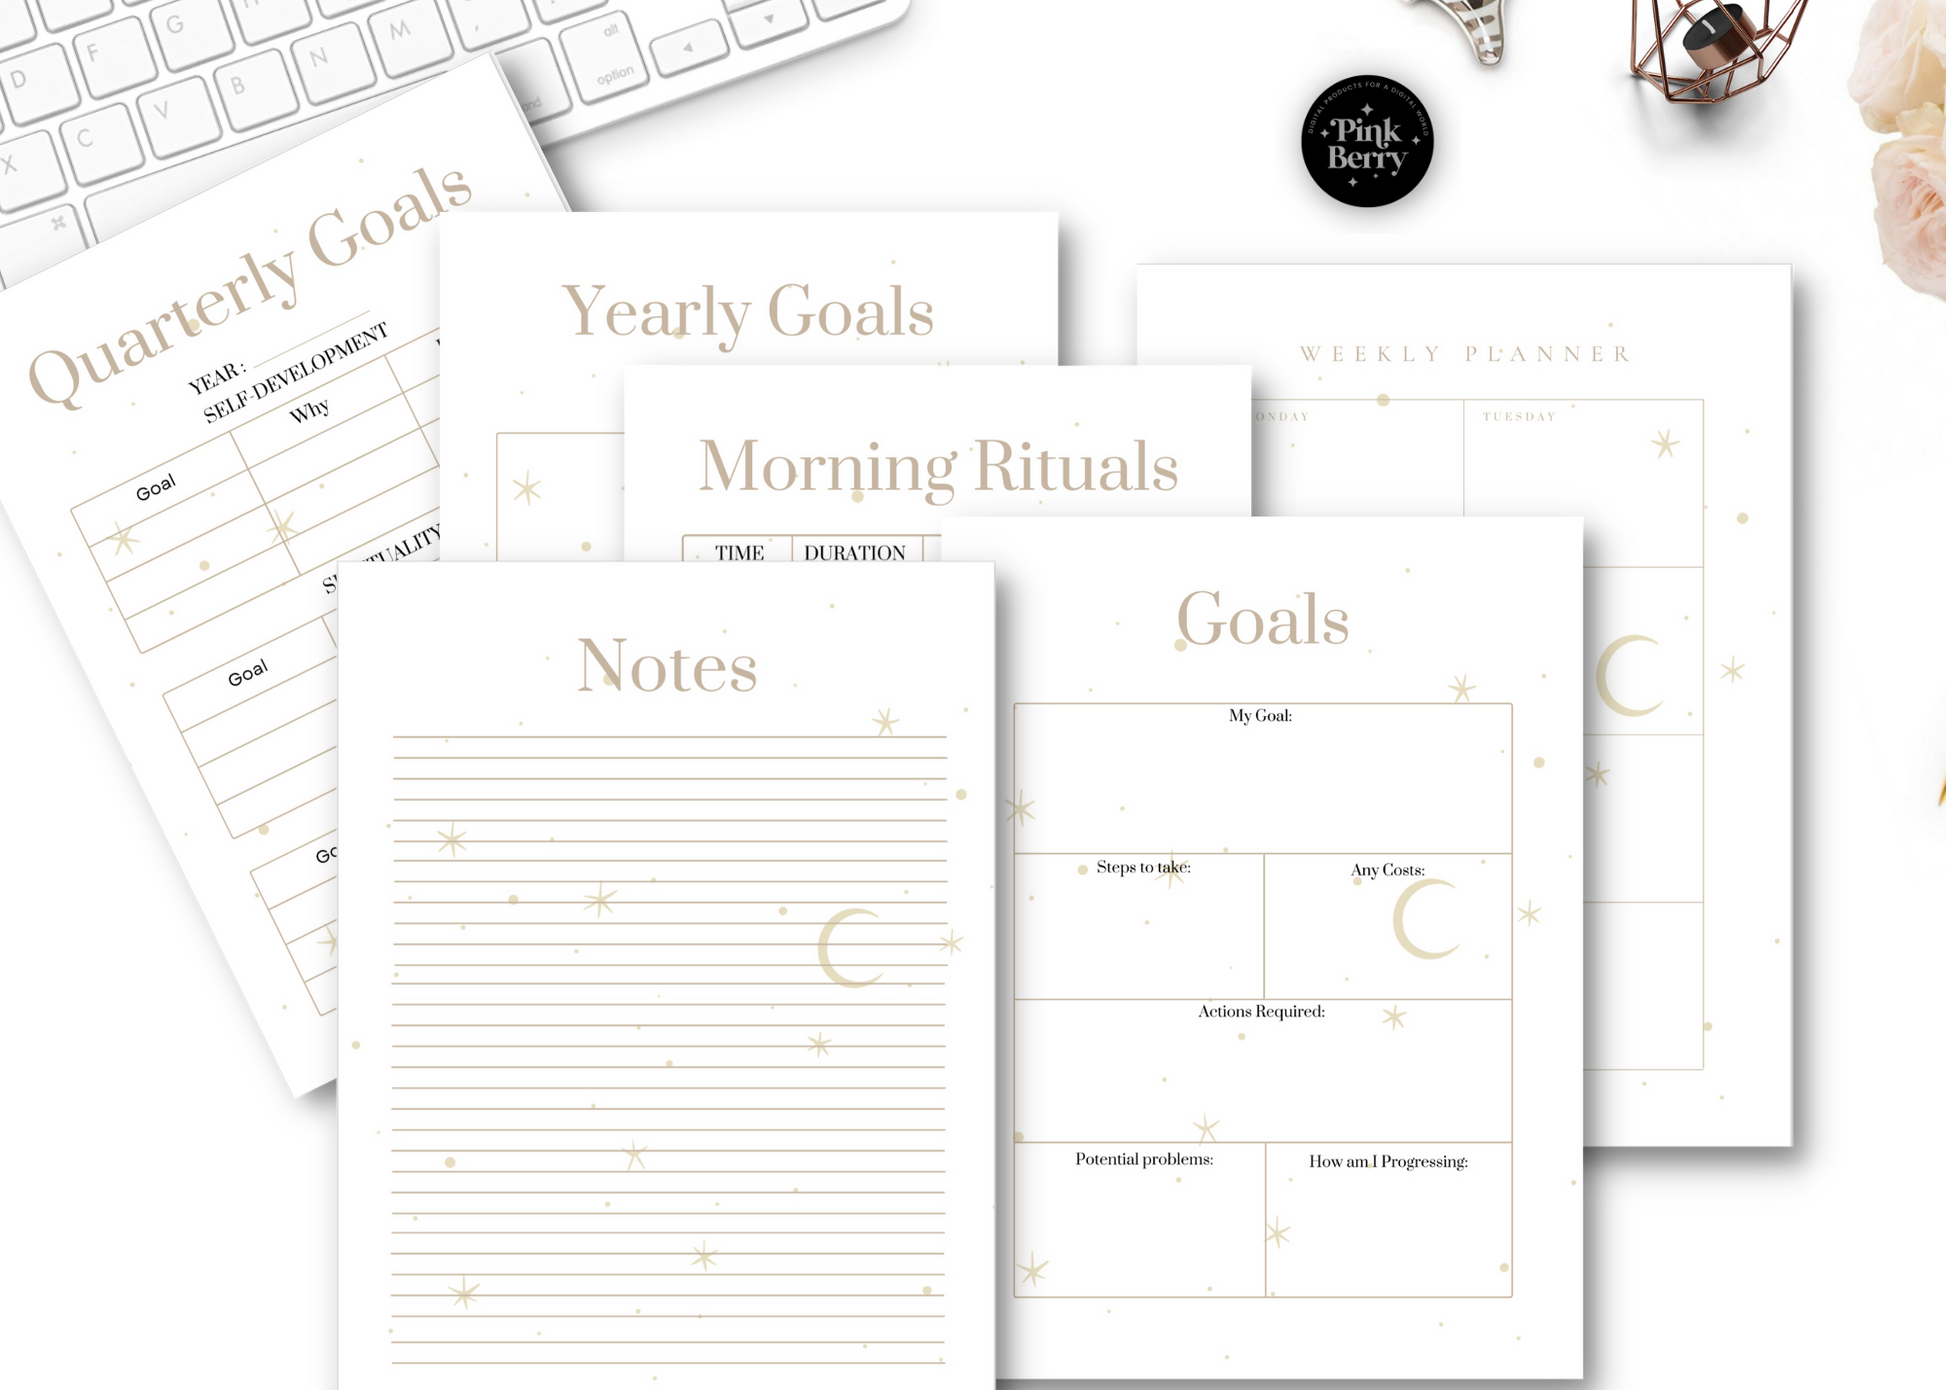 Mermaid Ladyship Logbook And Merrymaid Diary Planners: Law Of Attraction  And Time Management With Louis Vuit…